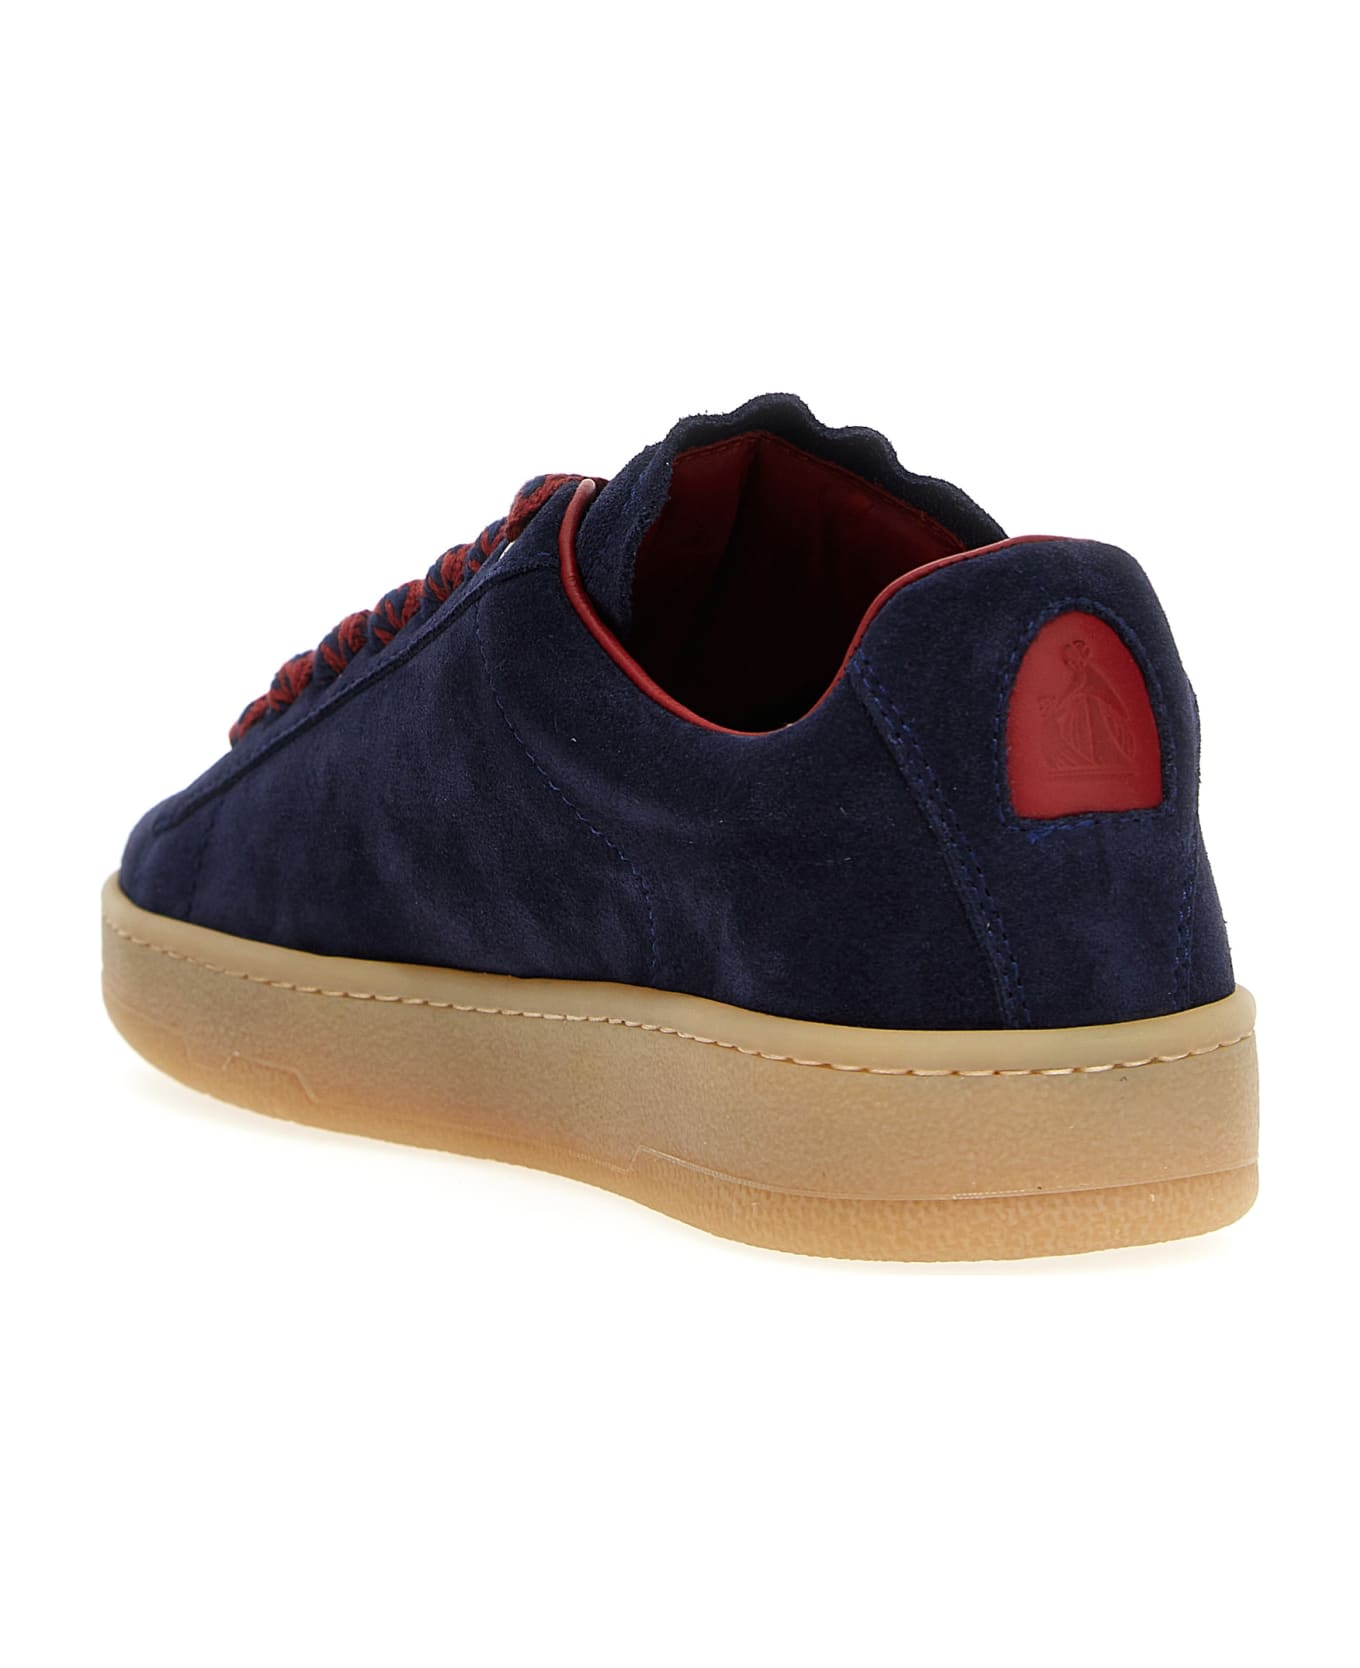 Lanvin 'lite Curb' Sneakers - Navy Blue/red スニーカー